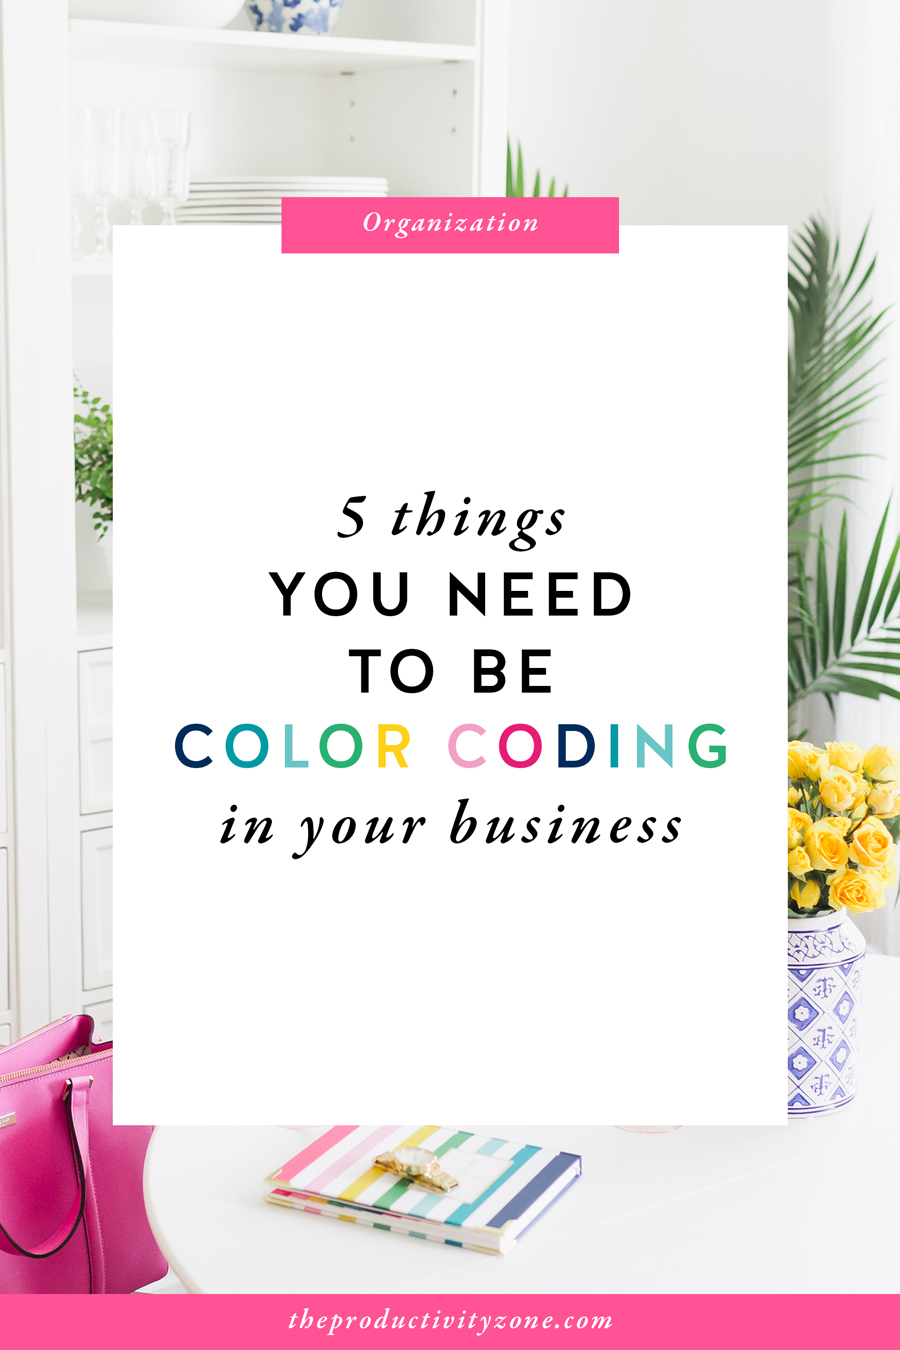 Color coding will help you be a more organized, efficient, and productive business owner. Over on The Productivity Zone, I’m sharing what 5 things you need to be color coding in your business to make your life EASIER!!